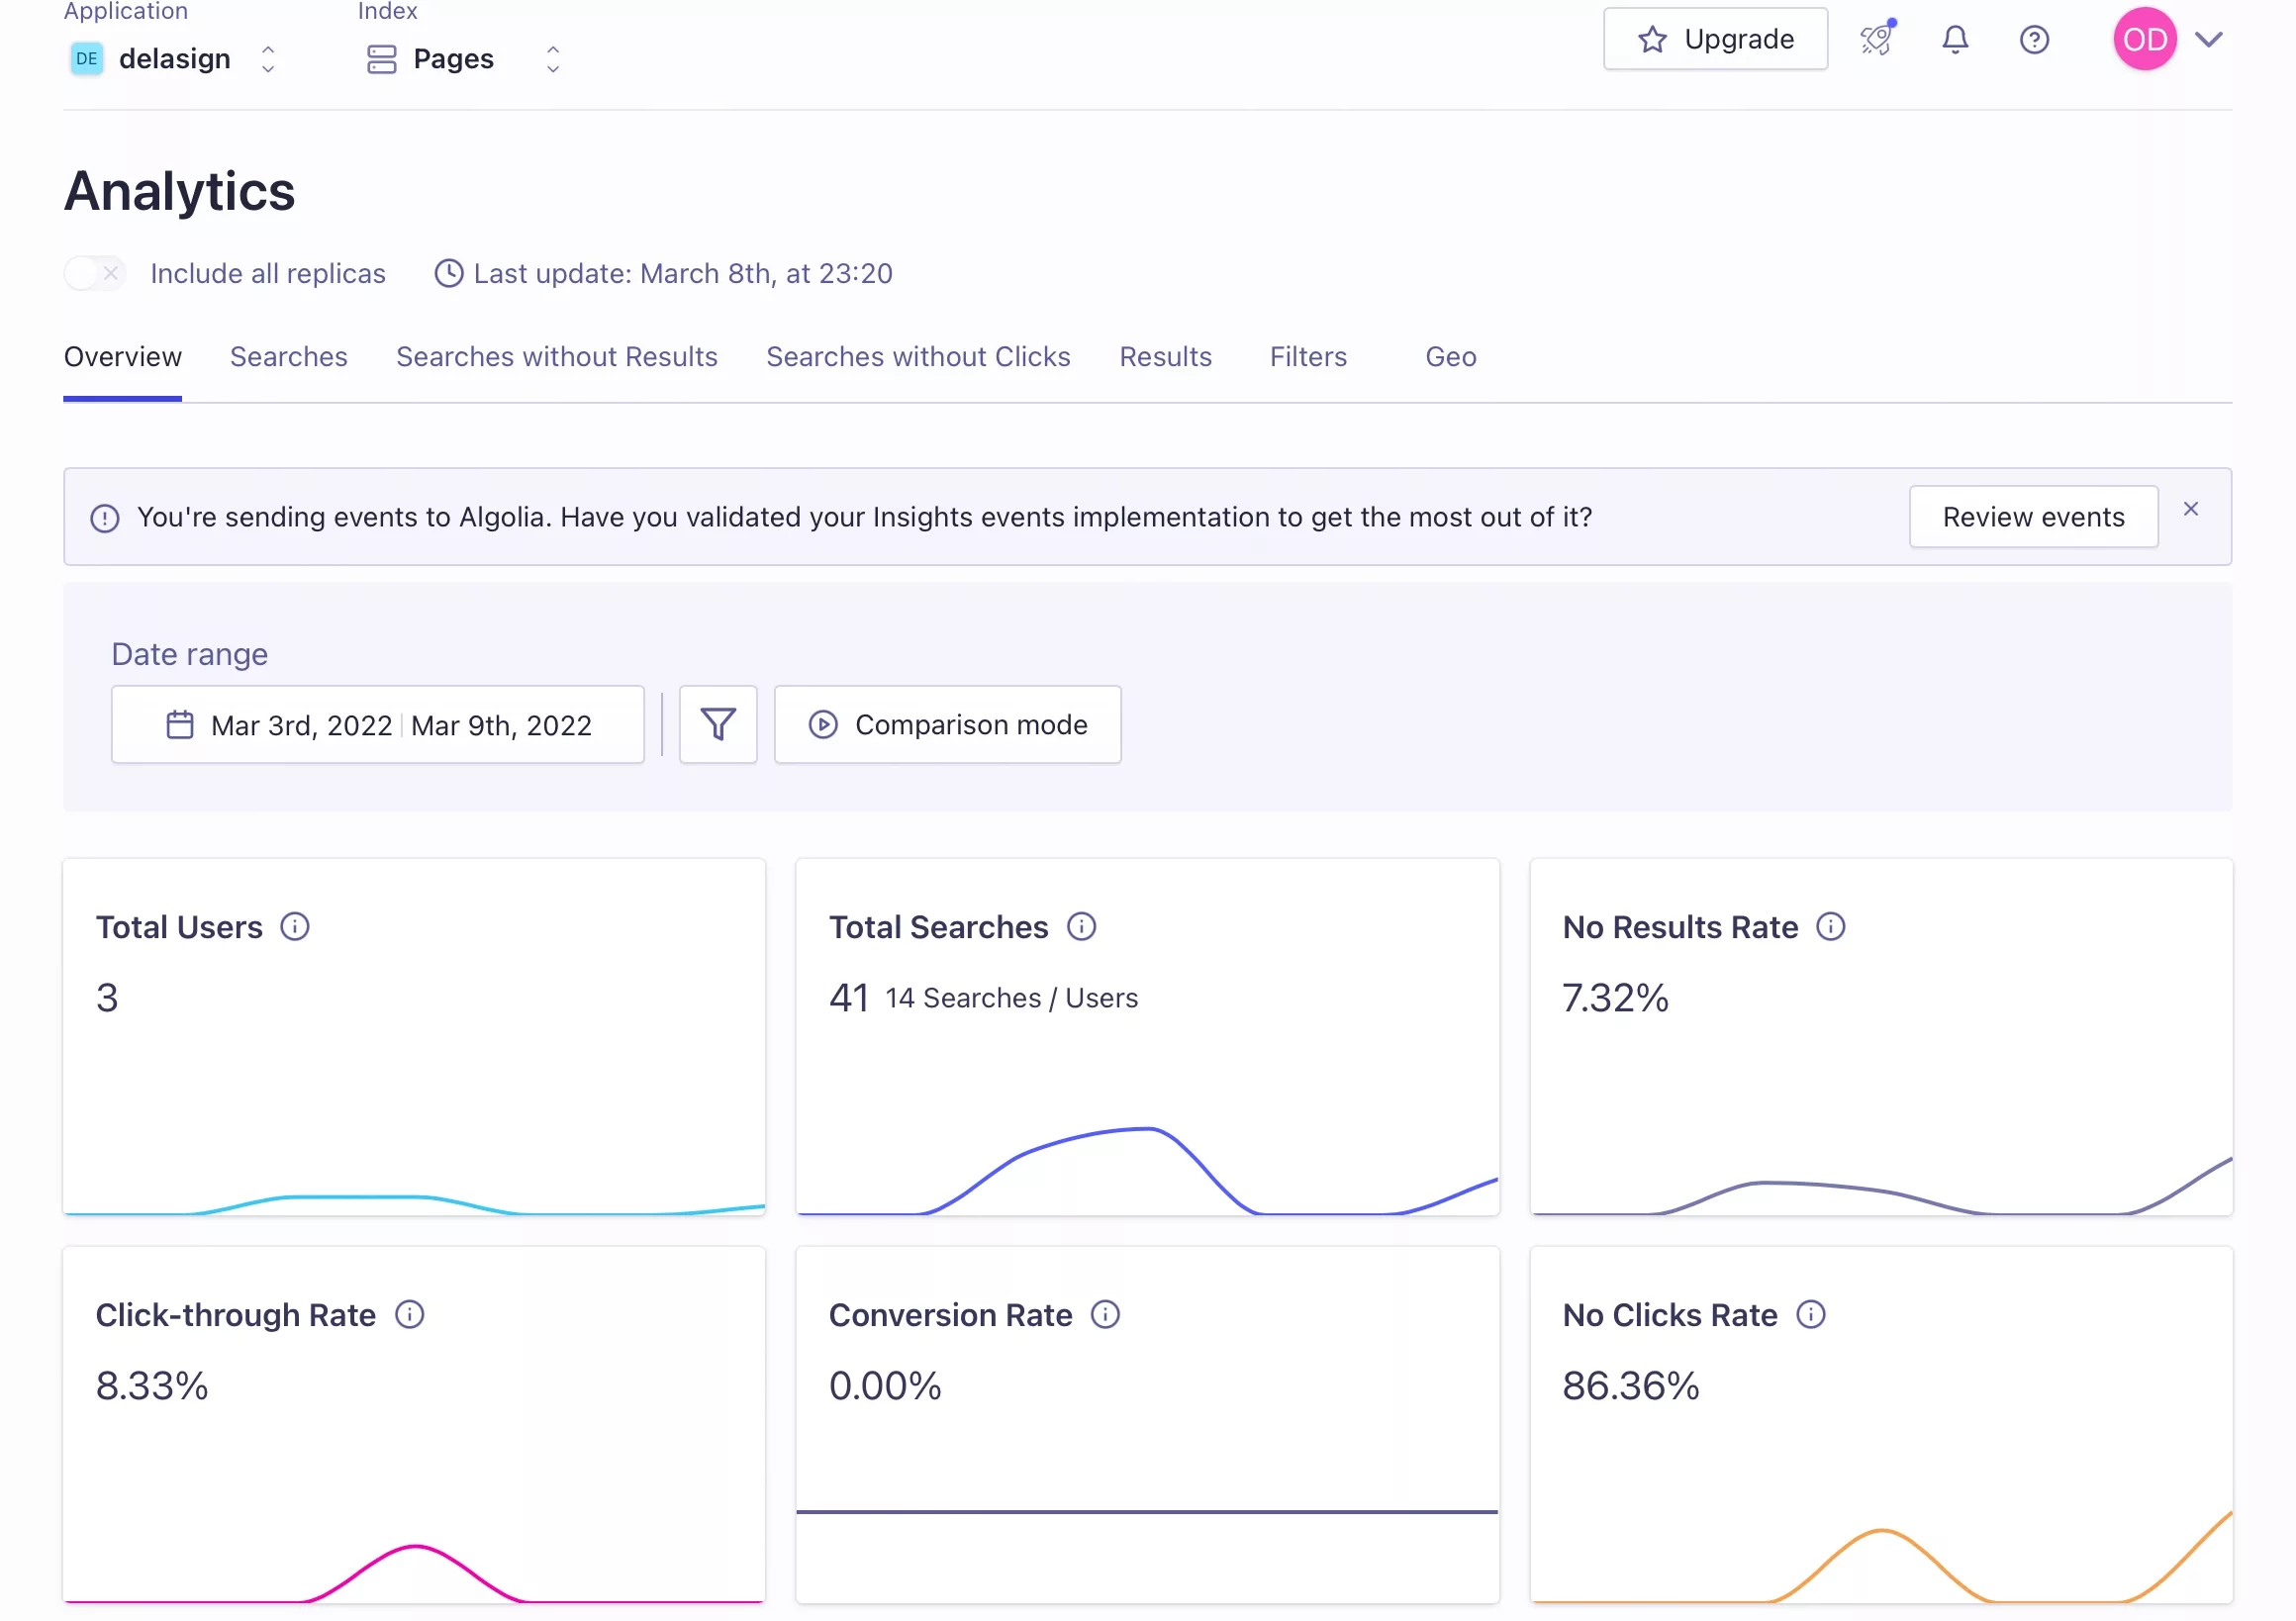 A sample dashboard from Algolia's analytics for our blog